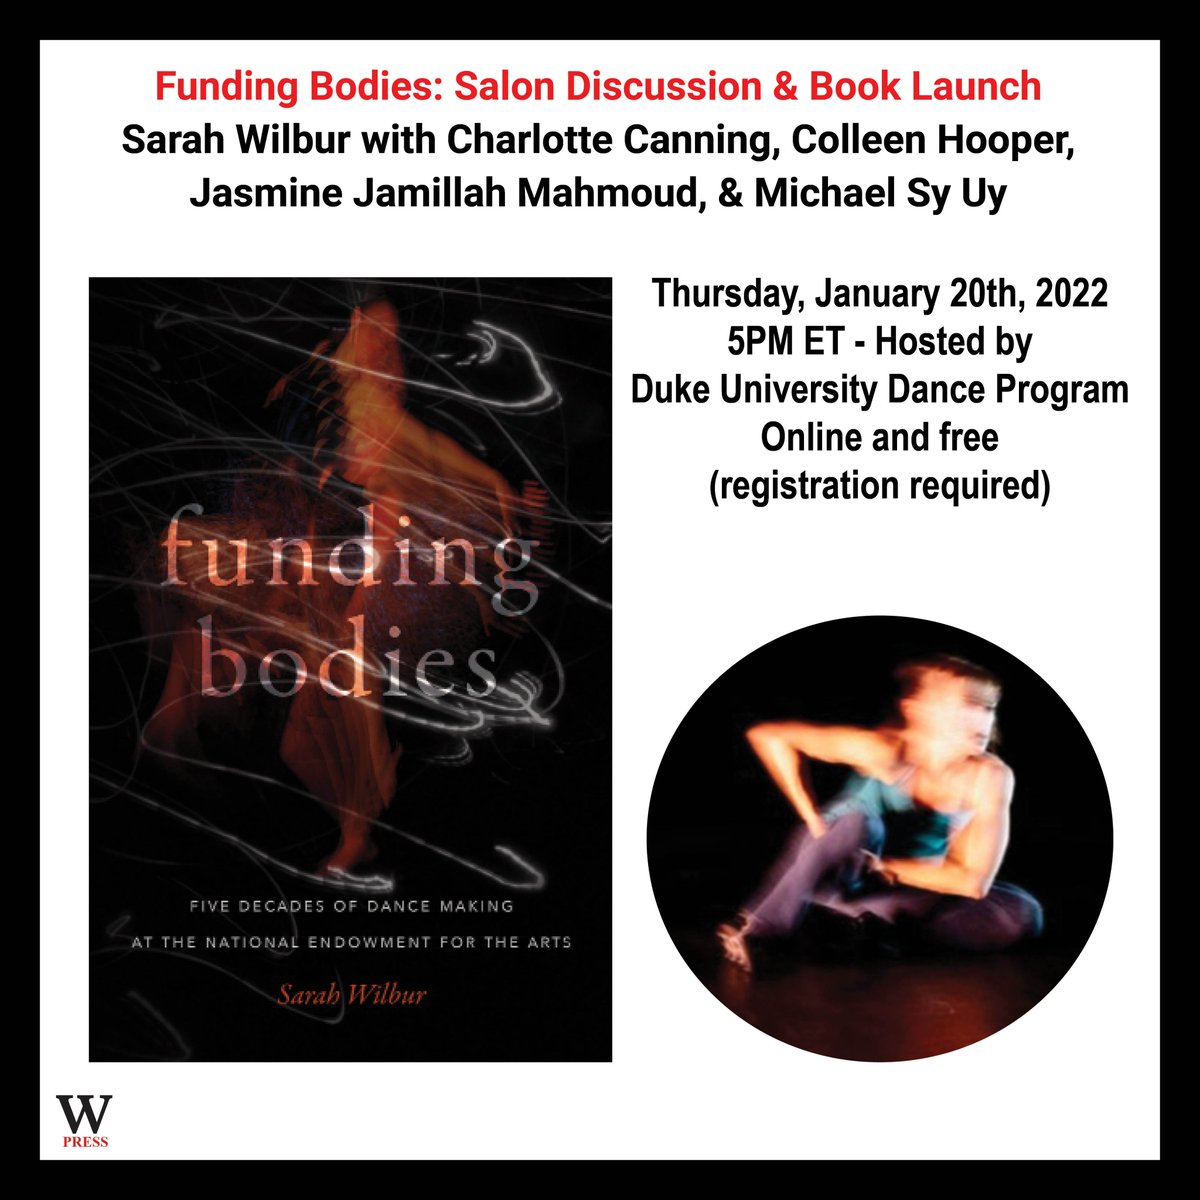 test Twitter Media - Join Asst. Professor of the Practice/Director of Graduate Studies in dance (Duke) Sarah Wilbur & esteemed colleagues in conversation about how arts funding bodies recruit and reward US dance artists and organizers. Register Here: https://t.co/zEzMk7lhY5 https://t.co/9OIOtRNbPe